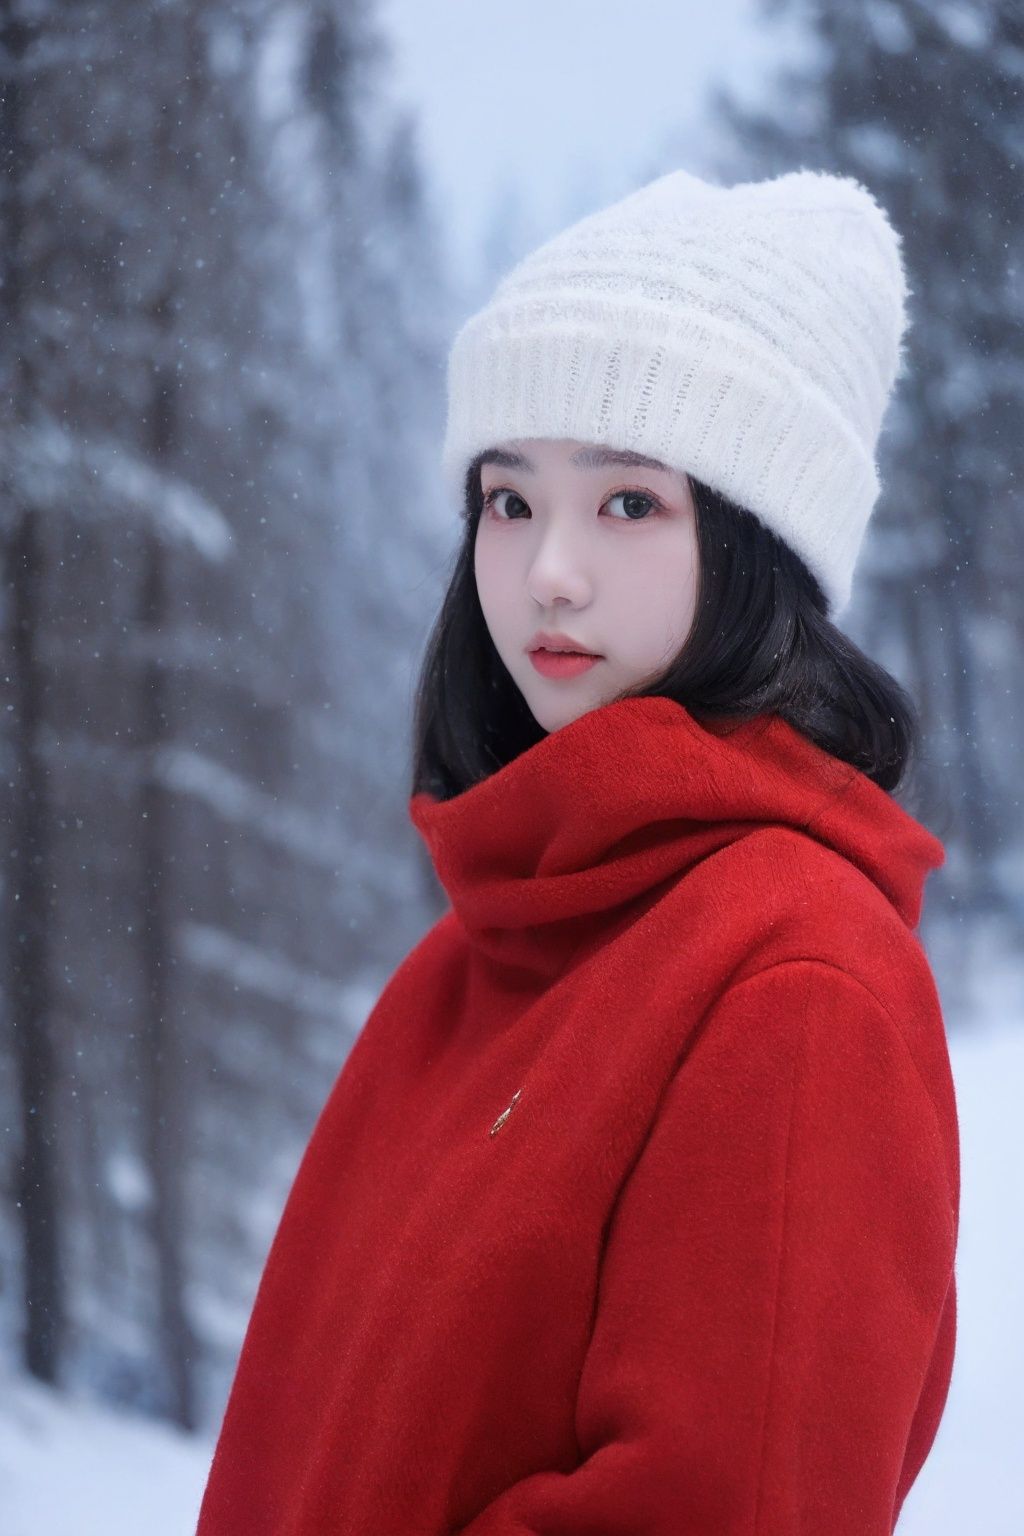  Best Quality, masterpiece, Ultra High Resolution, (photo: 1.4) , a girl wearing a plush hat, thick clothes, long bare legs, red coat, coat, winter, realism, HD 16K, xiqing, hszt, xiaxue